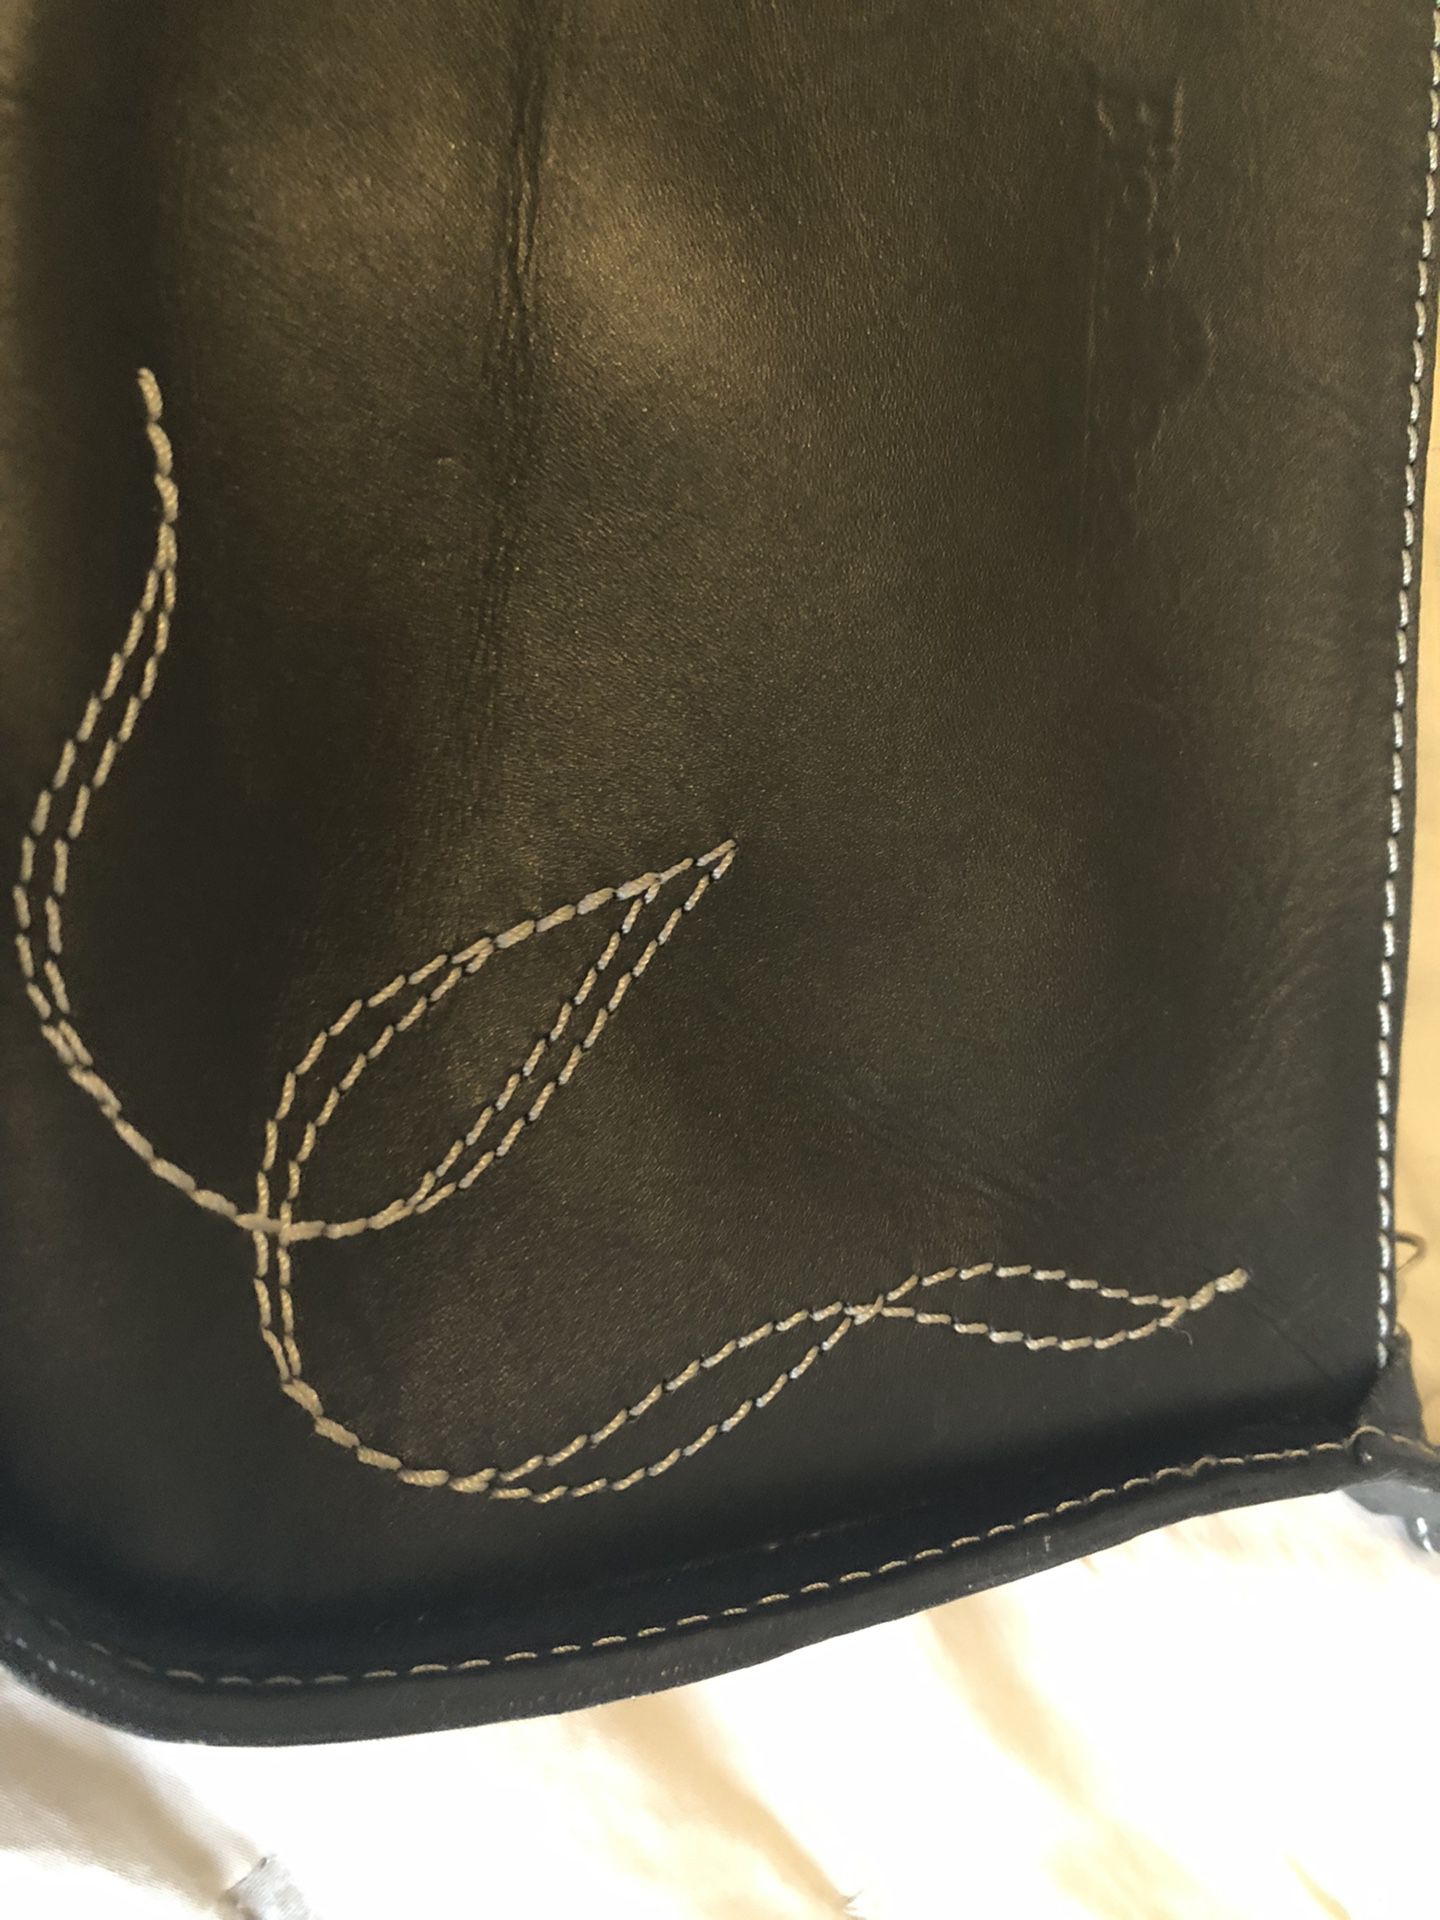 Genuine 100% Mexican Leather Purse